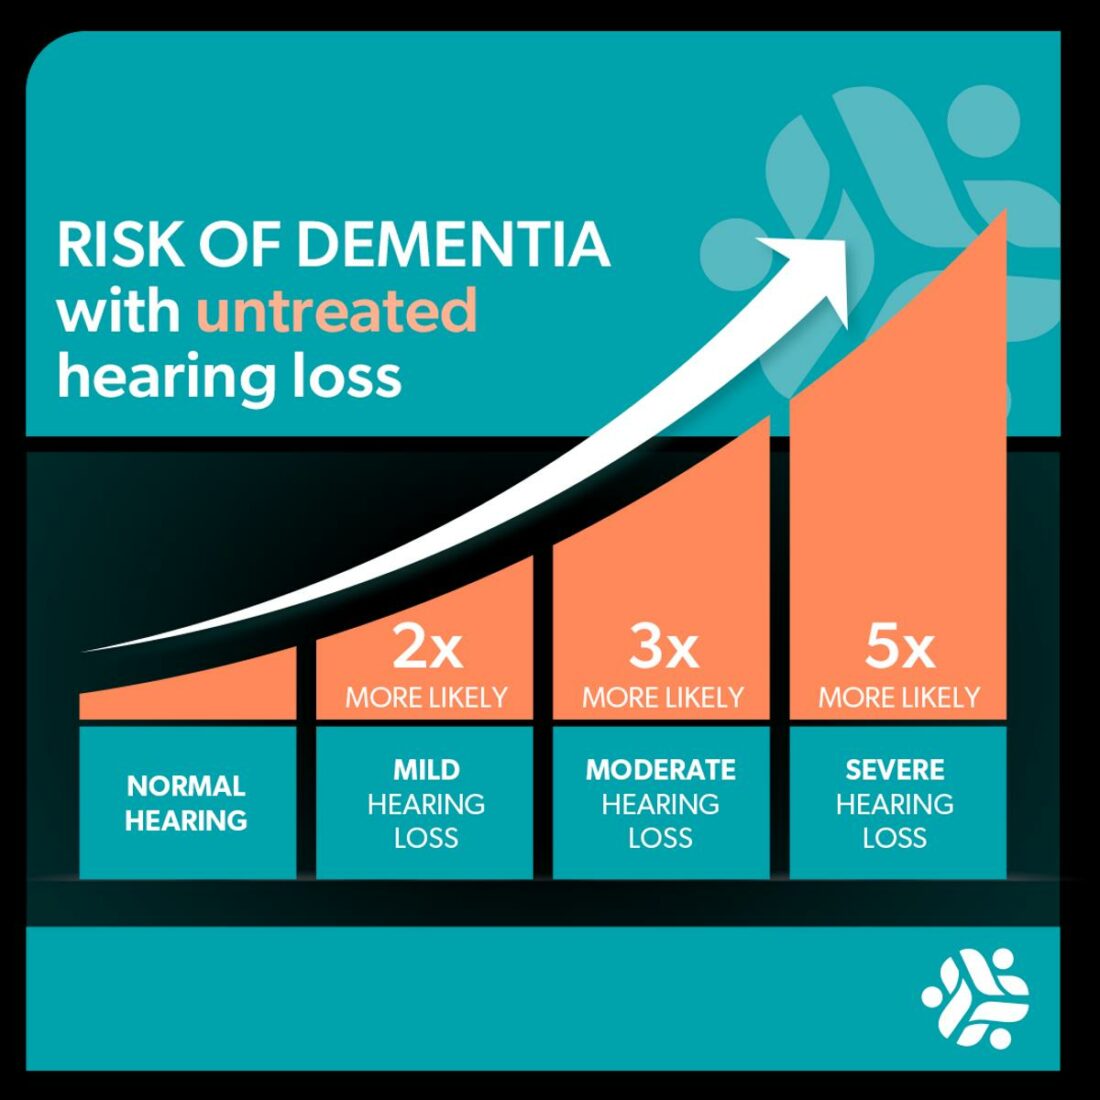 The risk of dementia with untreated hearing loss illustrated by the South Florida ENT Associates. (From: SFENTA)